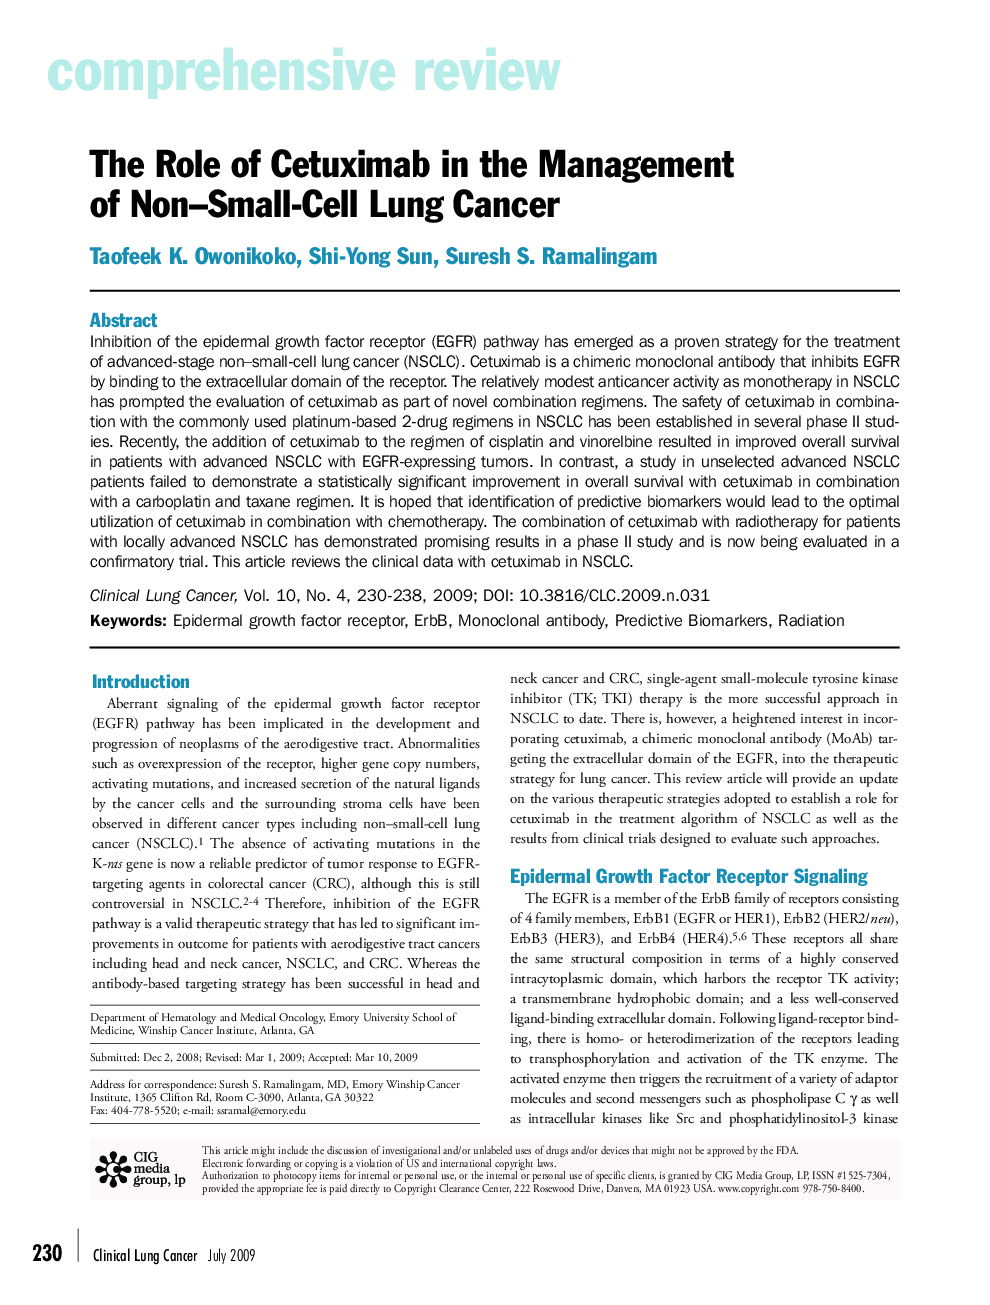 The Role of Cetuximab in the Management of Non–Small-Cell Lung Cancer 